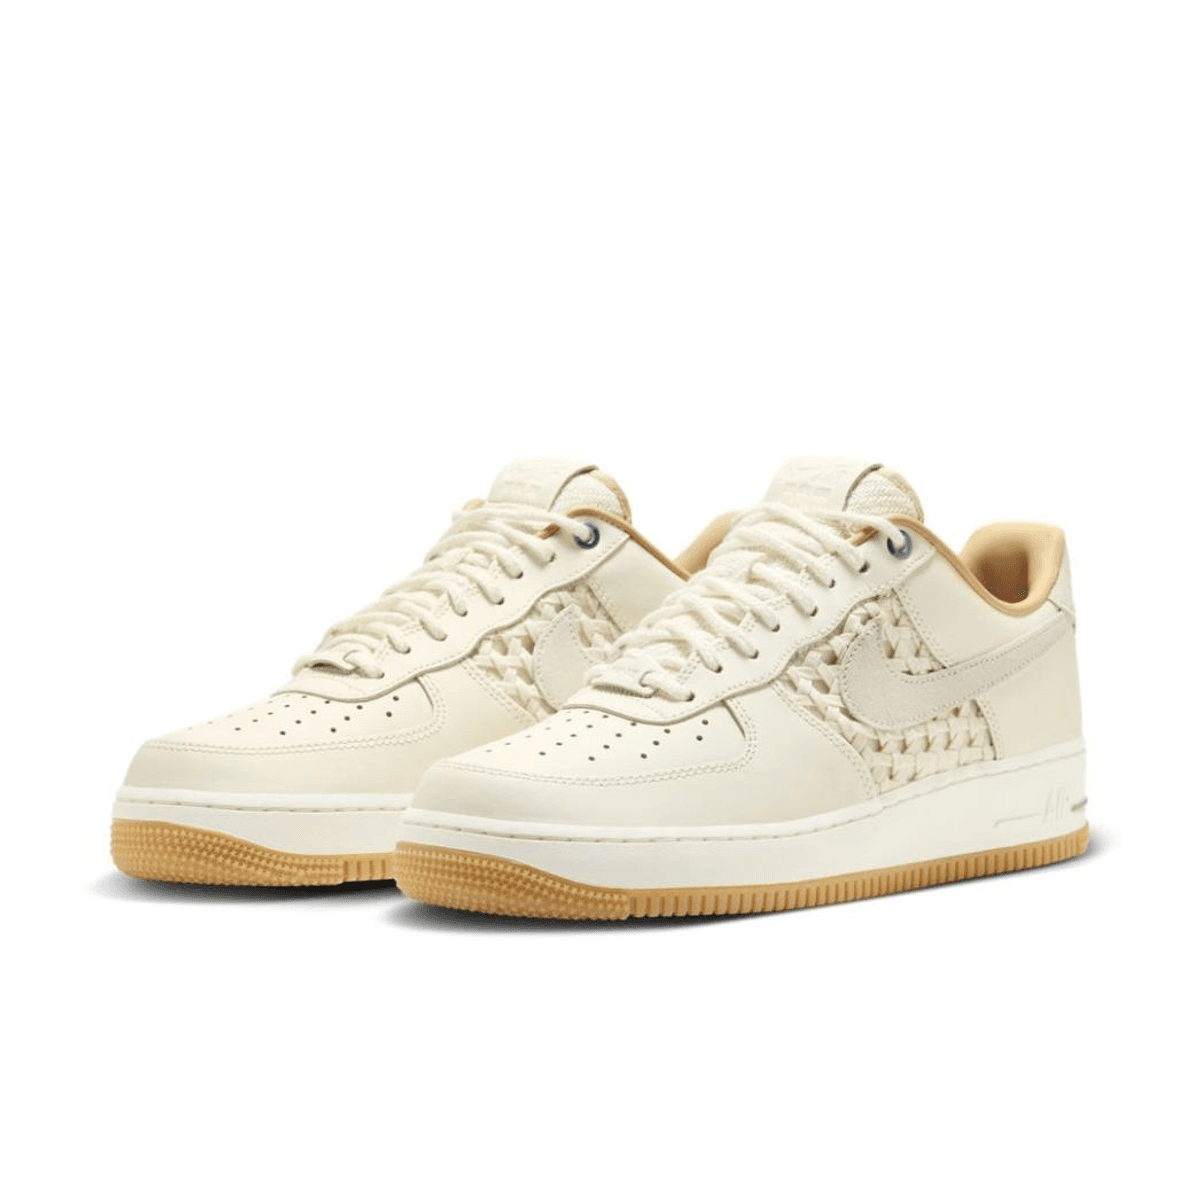 The Nike Air Force 1 Low NAI-KE Features Woven Side Panels